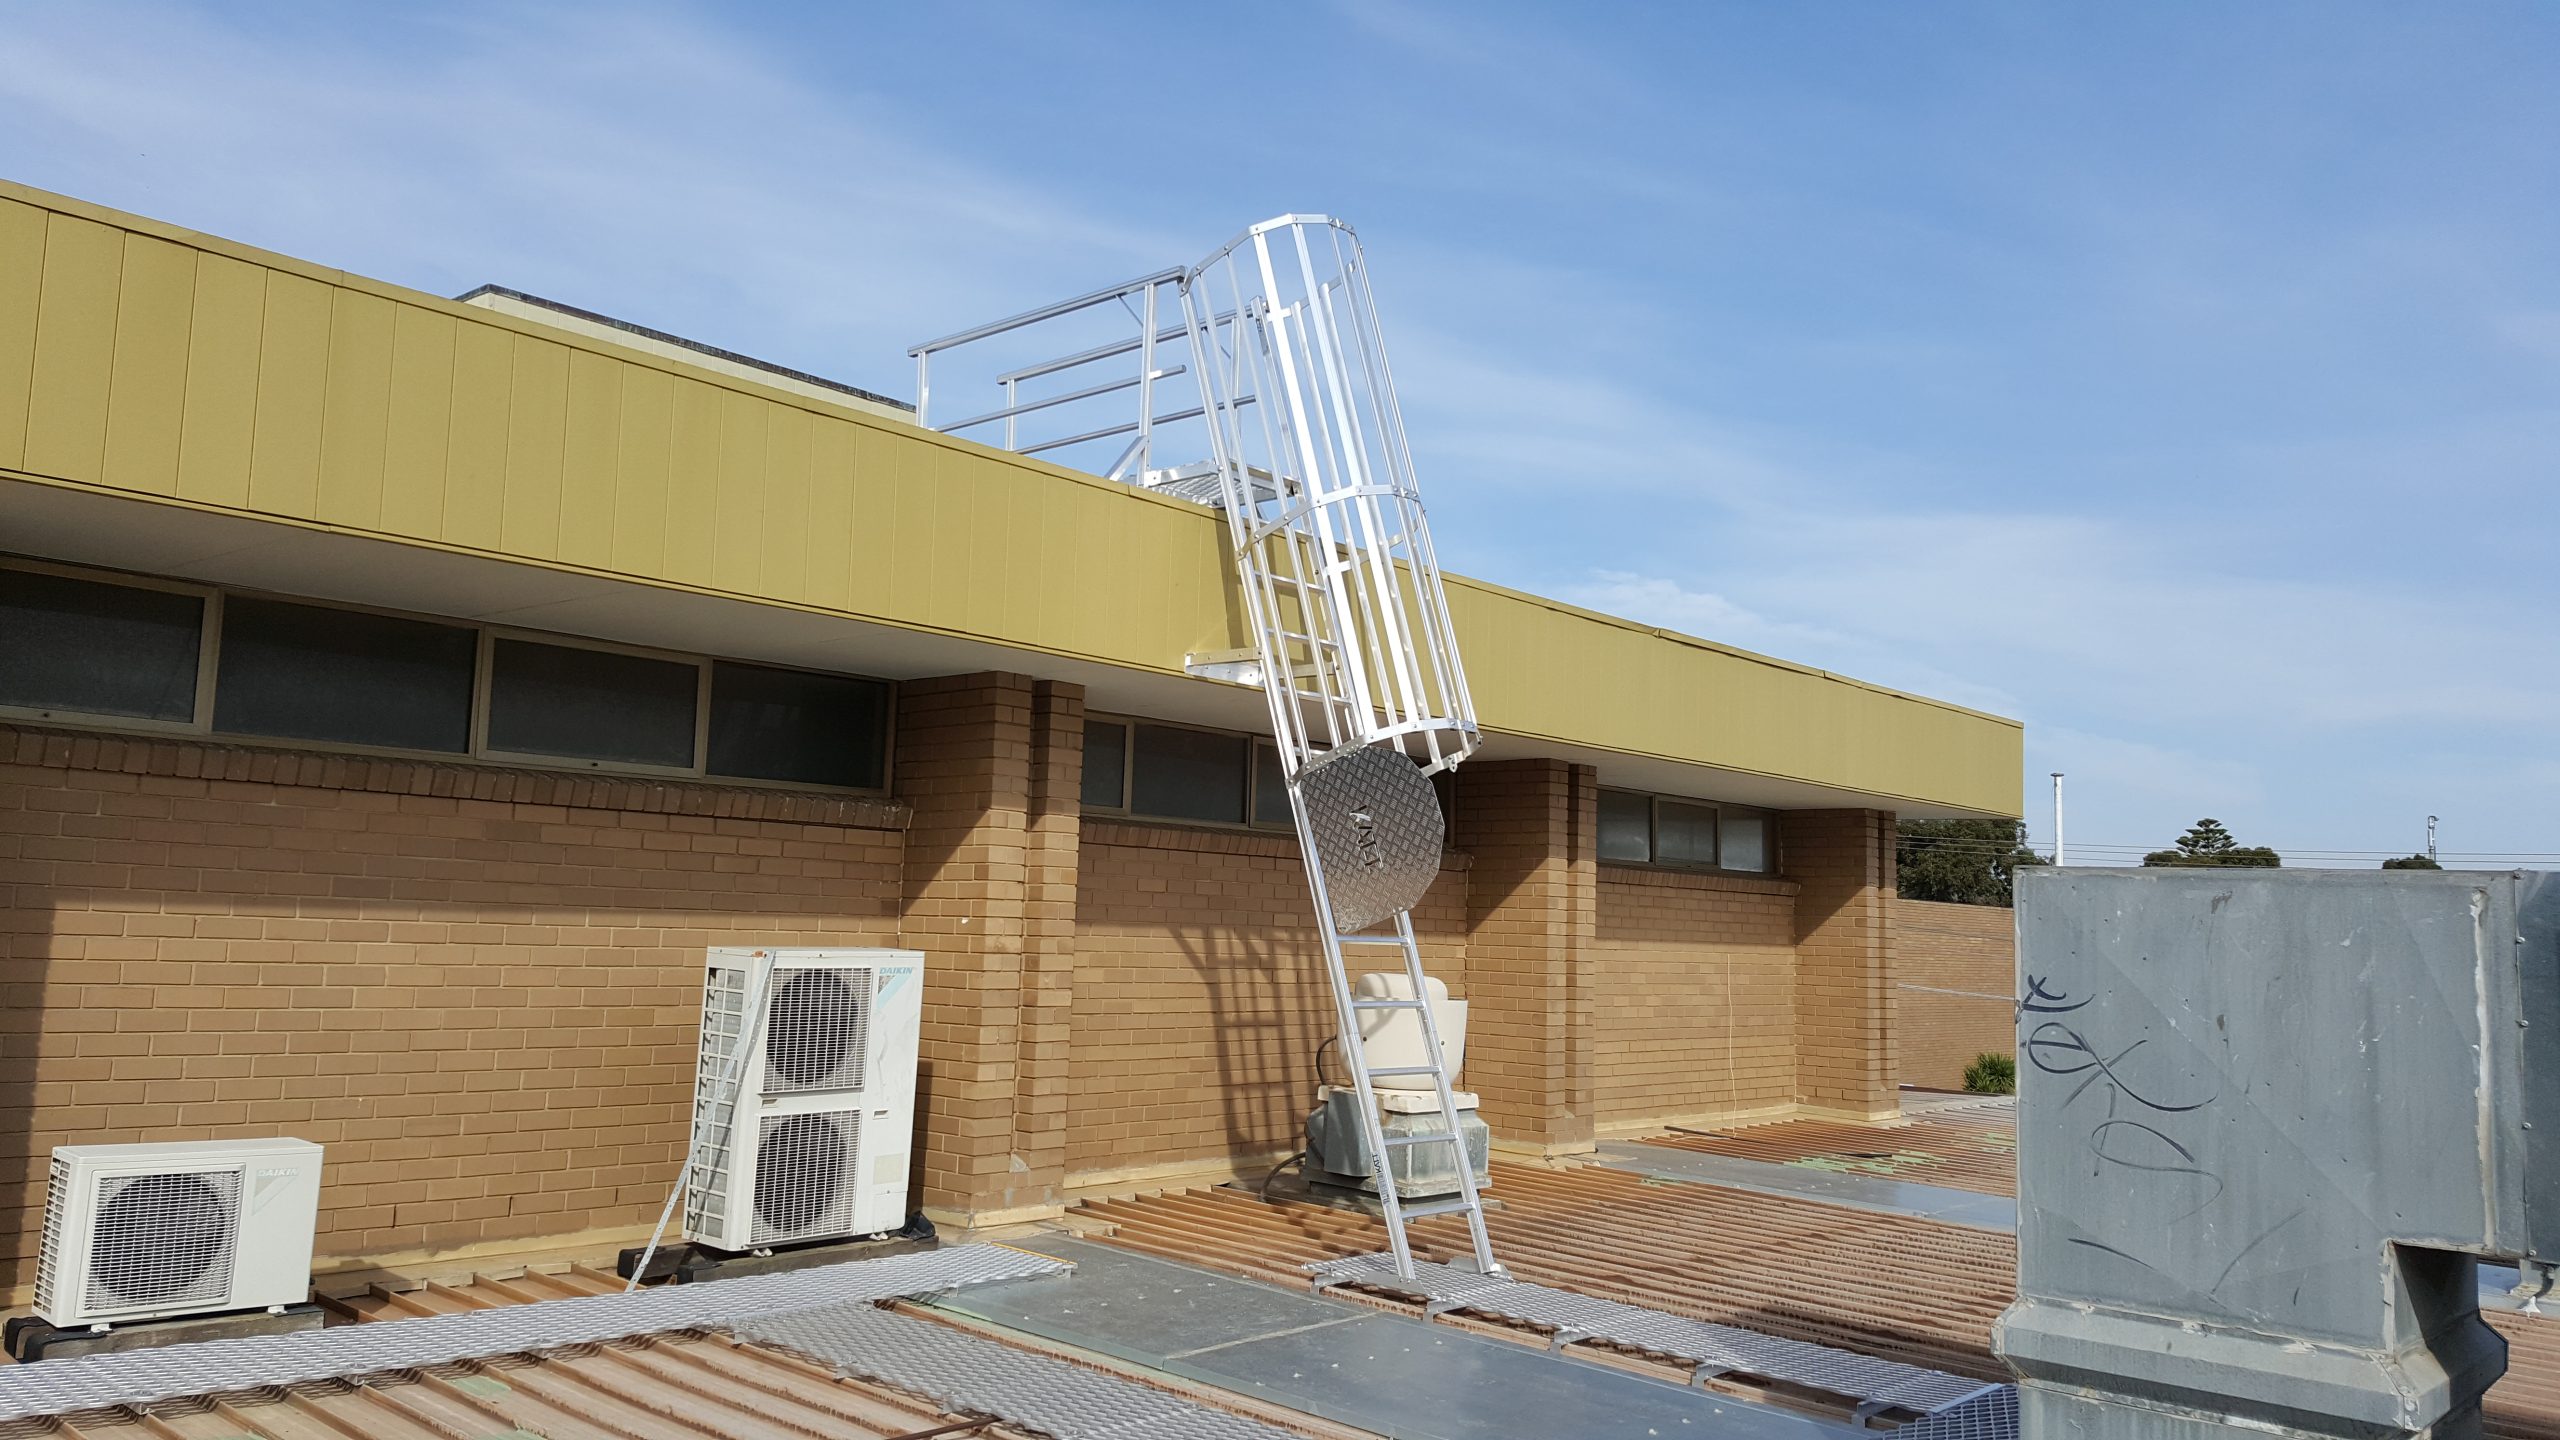 Roof Safety Sydney - Roof Access Sydney